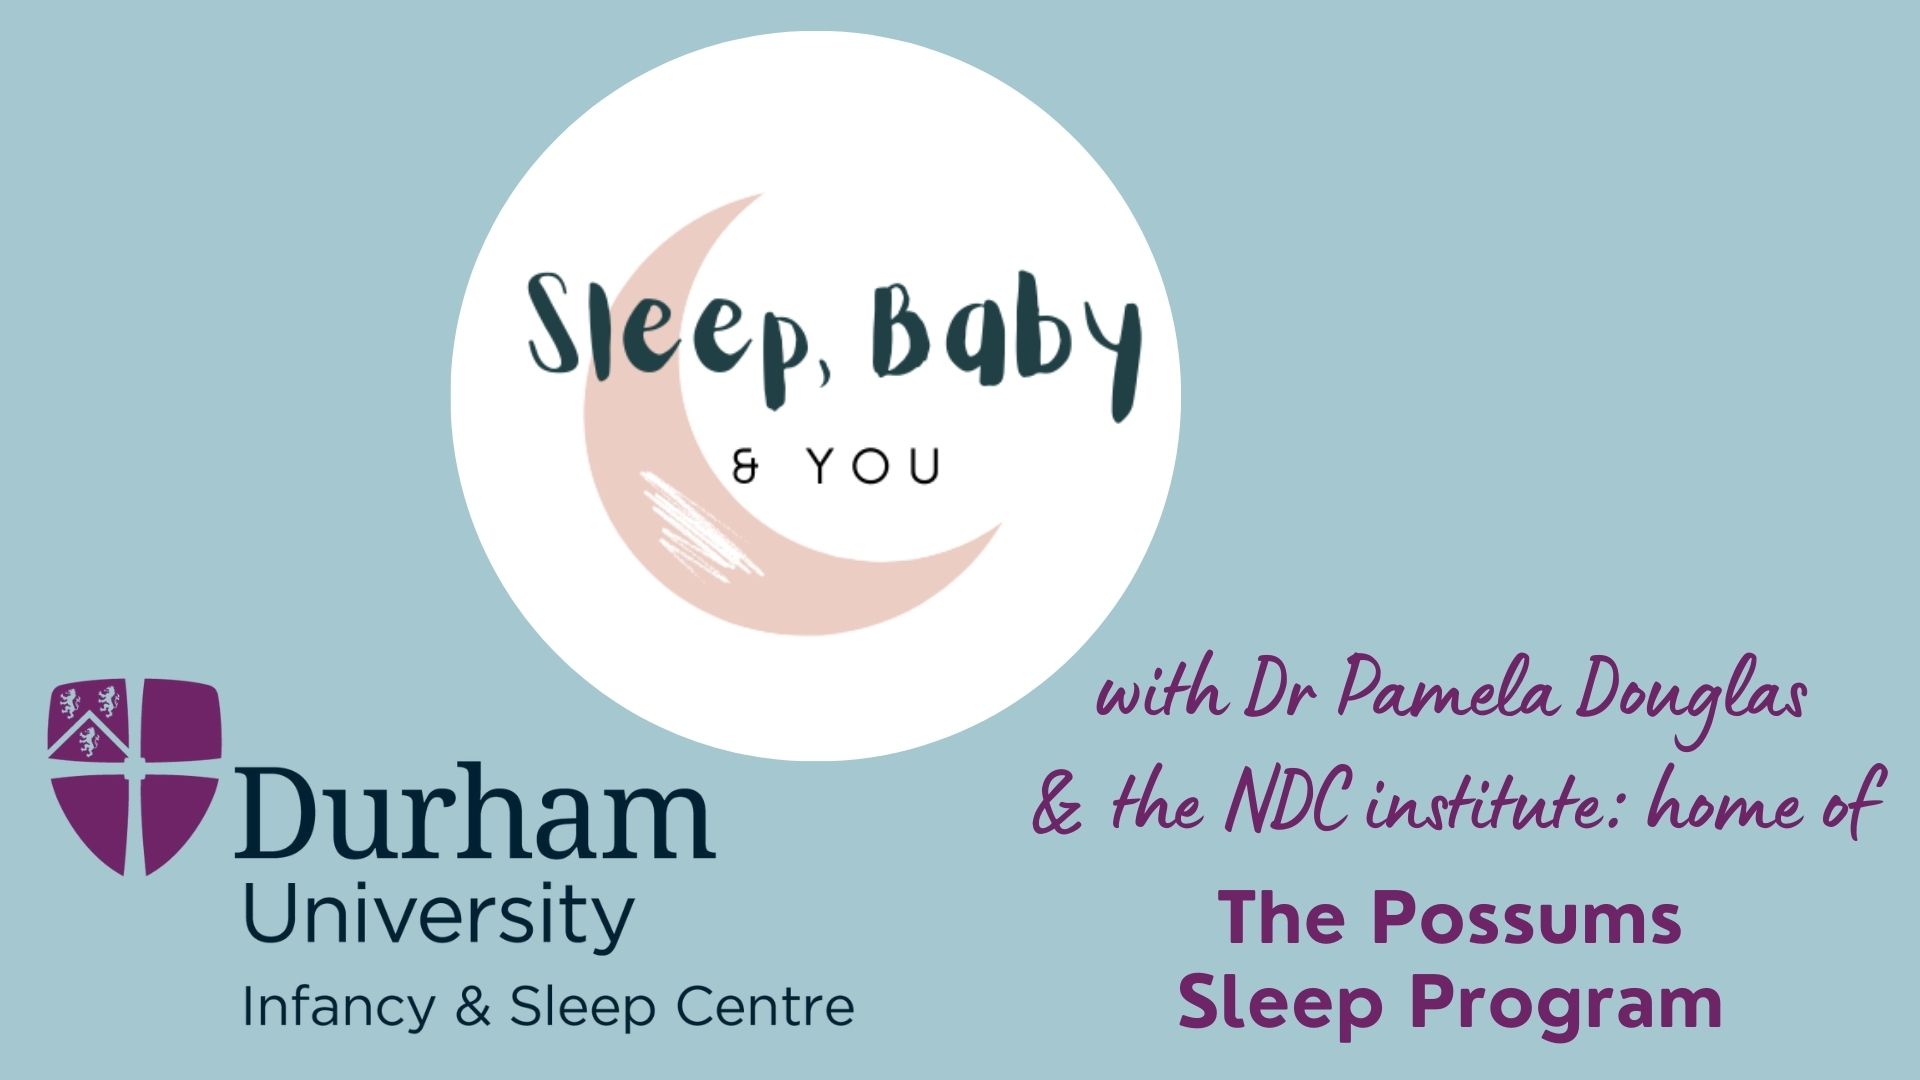 Logo for Sleep, Baby & You programme with Durham Infancy & Sleep Centre, and Dr Pamela Douglas of the NDC Institute: home of the possums sleep program